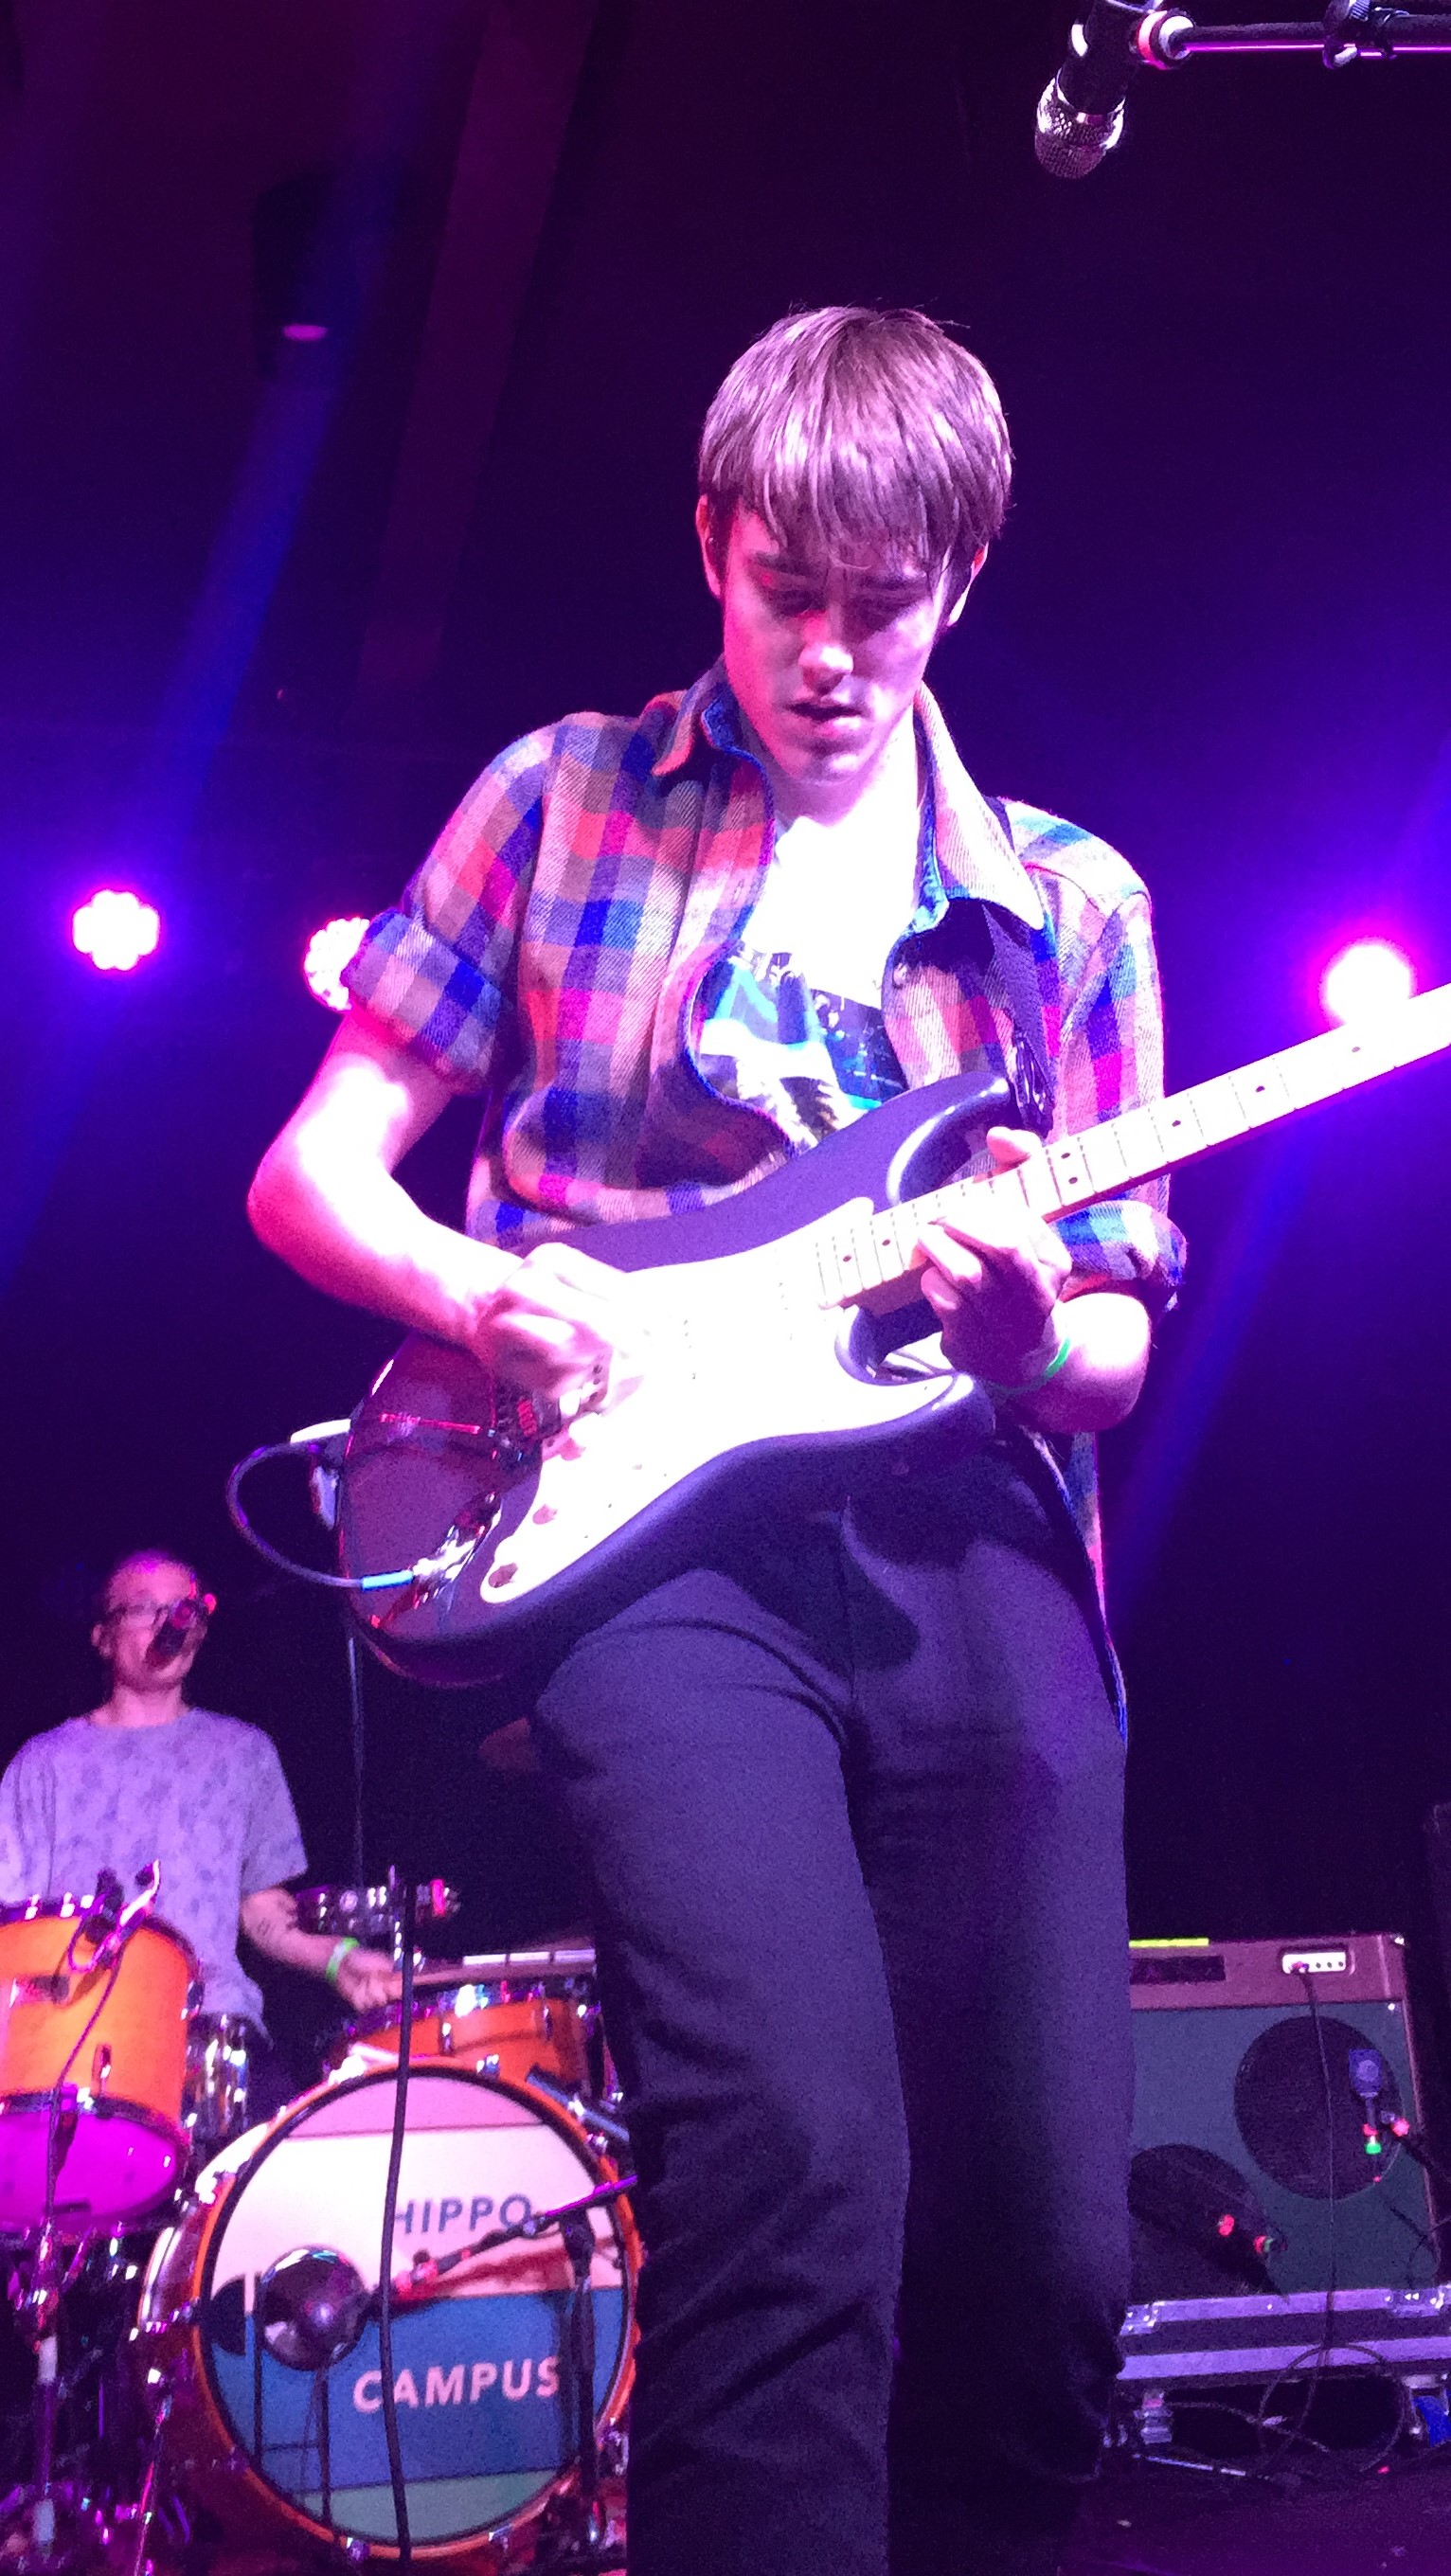 Jake Luppen from Hippo Campus